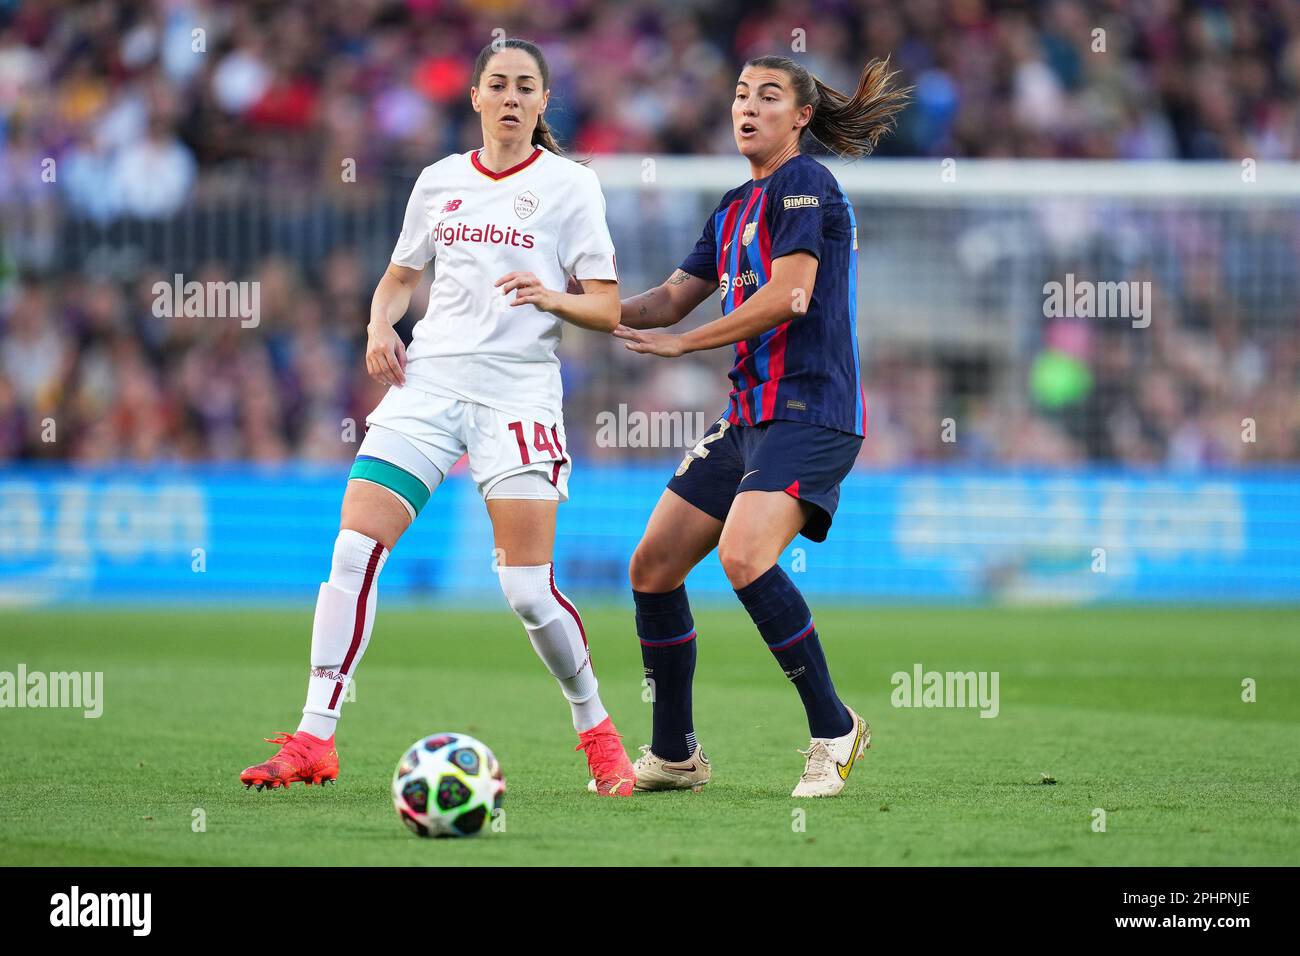 Vicky Losada of AS Roma and Patri Guijarro of FC Barcelona during the UEFA Womens Champions League match, Quarter-Finals, 2nd leg between FC Barcelona and v AS Roma played at Spotify Camp Nou Stadium on March 29, 2023 in Barcelona, Spain. (Photo by Colas Buera / PRESSIN) Stock Photo